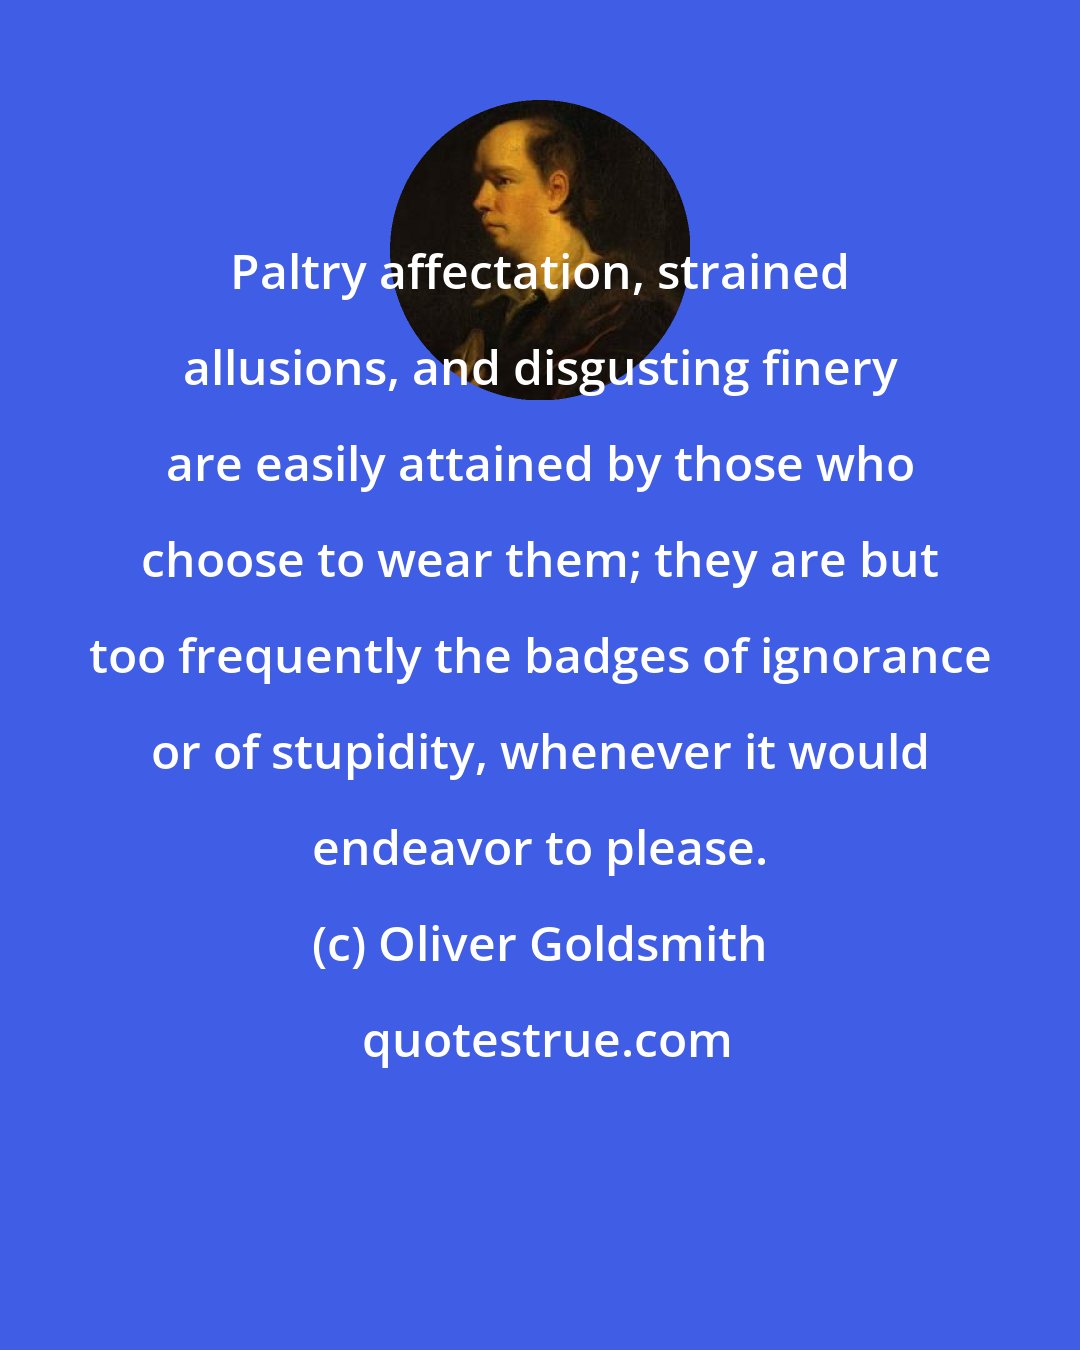 Oliver Goldsmith: Paltry affectation, strained allusions, and disgusting finery are easily attained by those who choose to wear them; they are but too frequently the badges of ignorance or of stupidity, whenever it would endeavor to please.